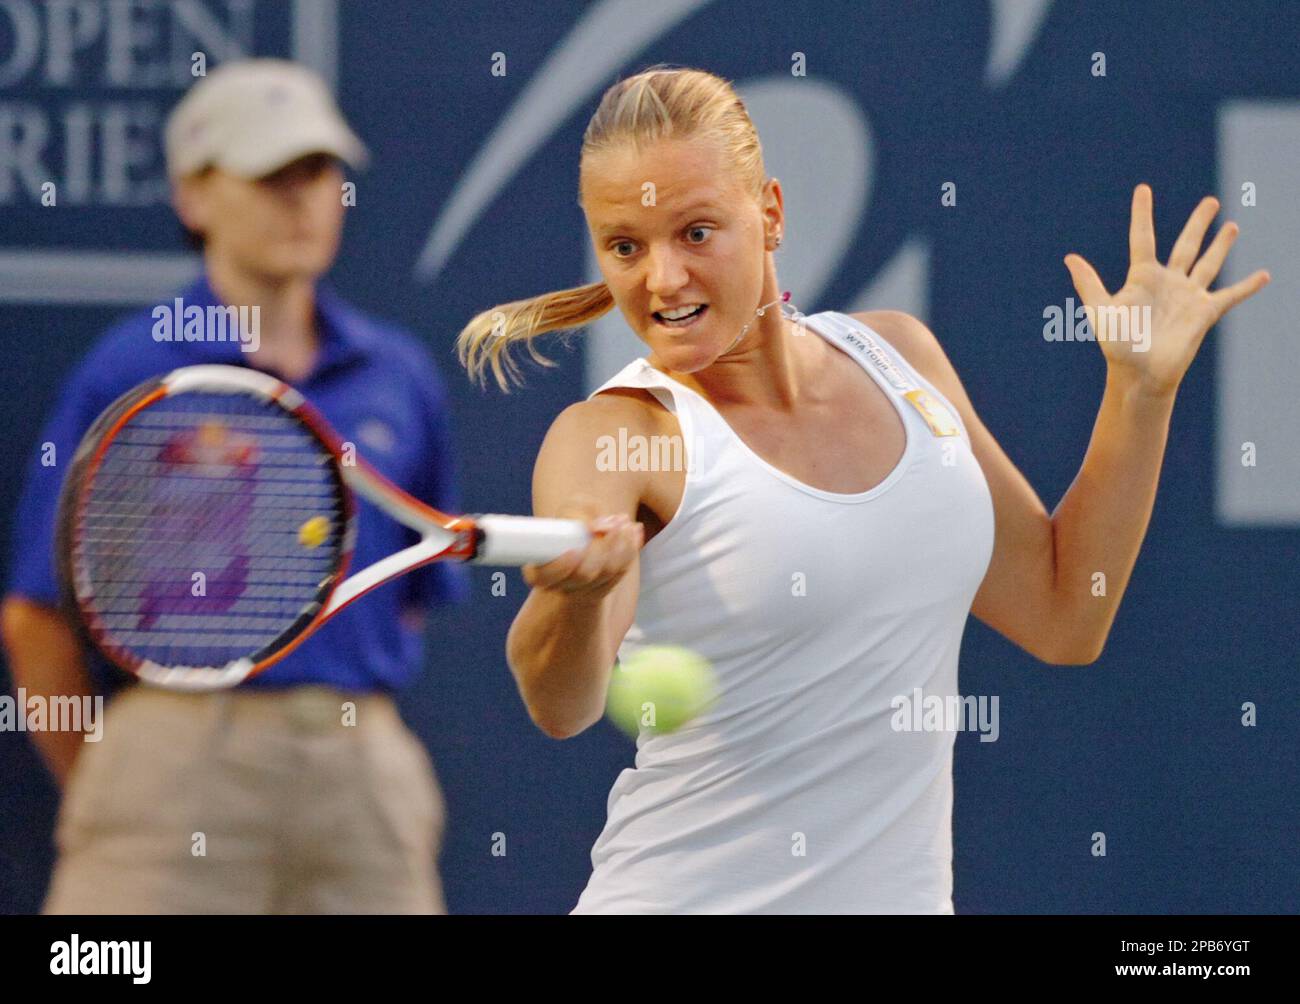 Agnes Szavay, of Hungary, hits a forehand return during the first set of her women's semifinal singles match against Eleni Daniilidou, of Greece, at the Pilot Pen Tennis tournament in New Haven, Conn., on Friday, Aug. 24, 2007. (AP Photo/Fred Beckham) Stock Photo